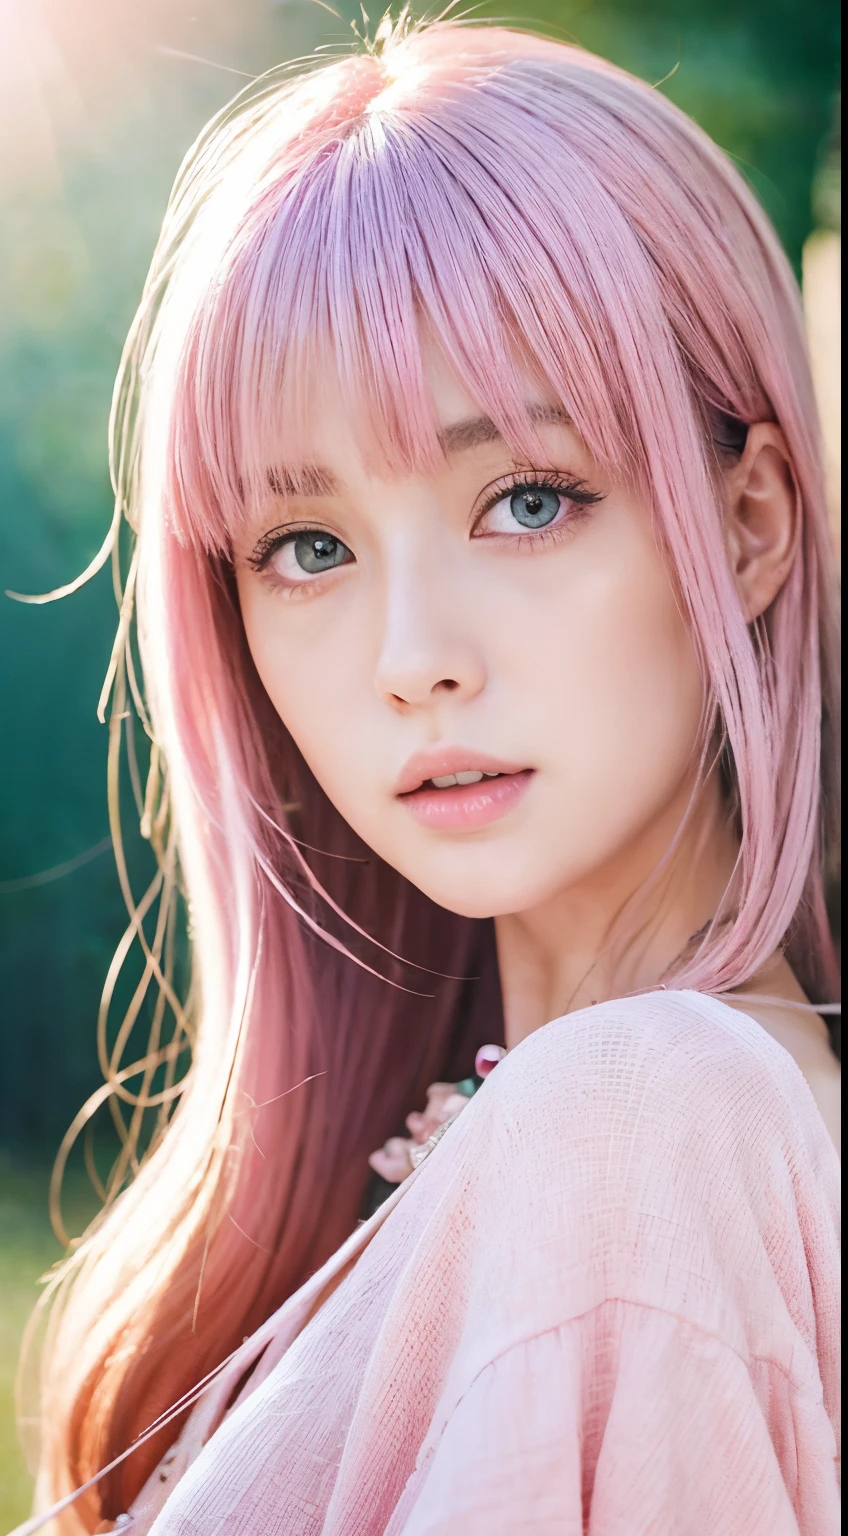 （Takato Yamamoto style）（2-dimensional）（Flatten）1 girl in、A pink-haired、length hair、Pink eyes、Gradient eyes、Sparkling eyes、Bright pupils、finely eye、expressive eyes、pink  dress、jewely、Pink lighting、pink theme、（foam：1.5）、Abstract、best qualtiy、ultra-detailliert、